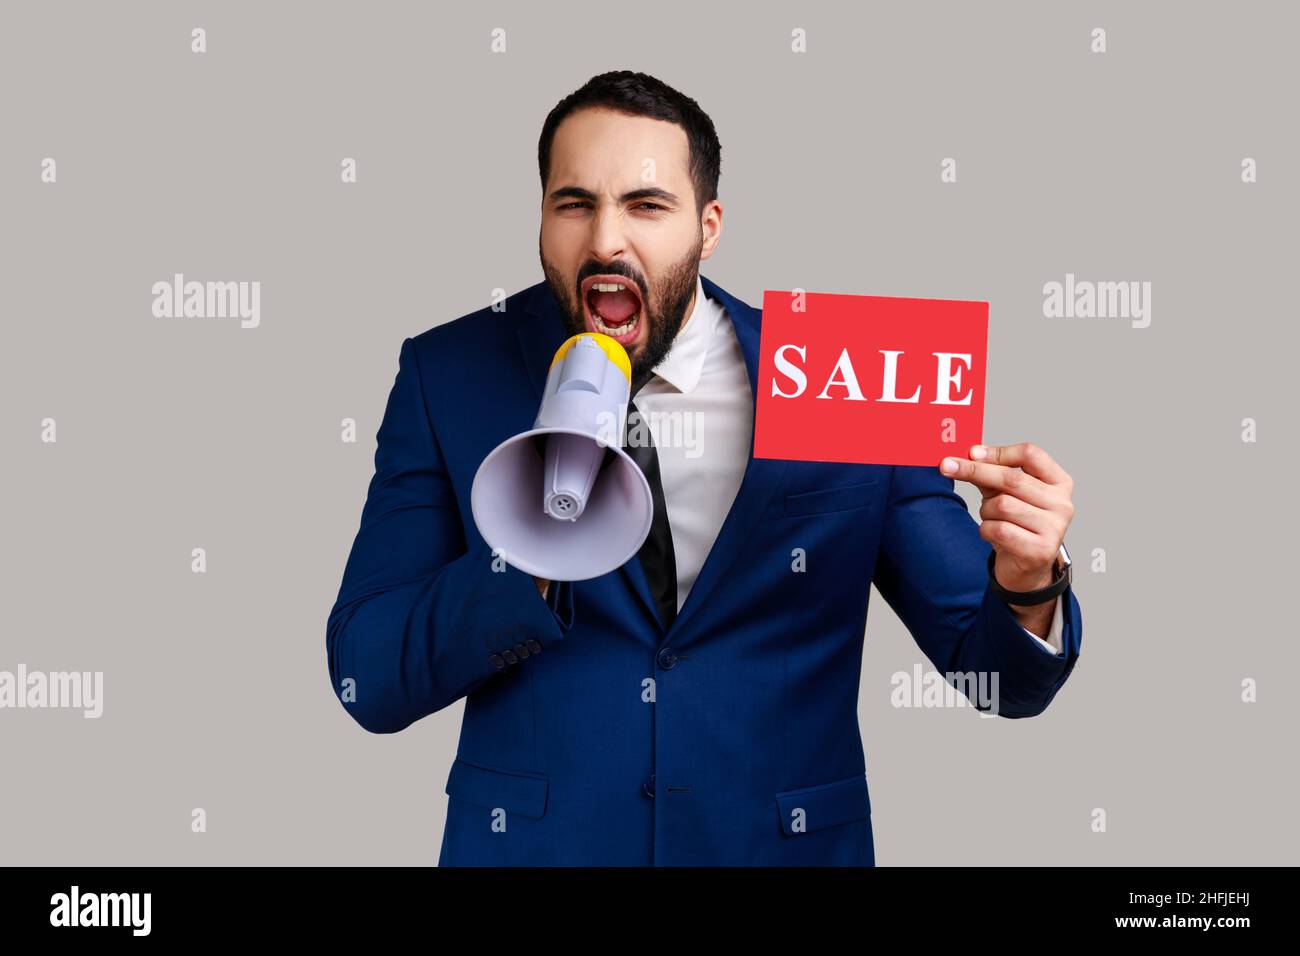 Portrait of bearded man paying attention announcing big sale yelling at loudspeaker, black Friday shopping, wearing official style suit. Indoor studio shot isolated on gray background. Stock Photo